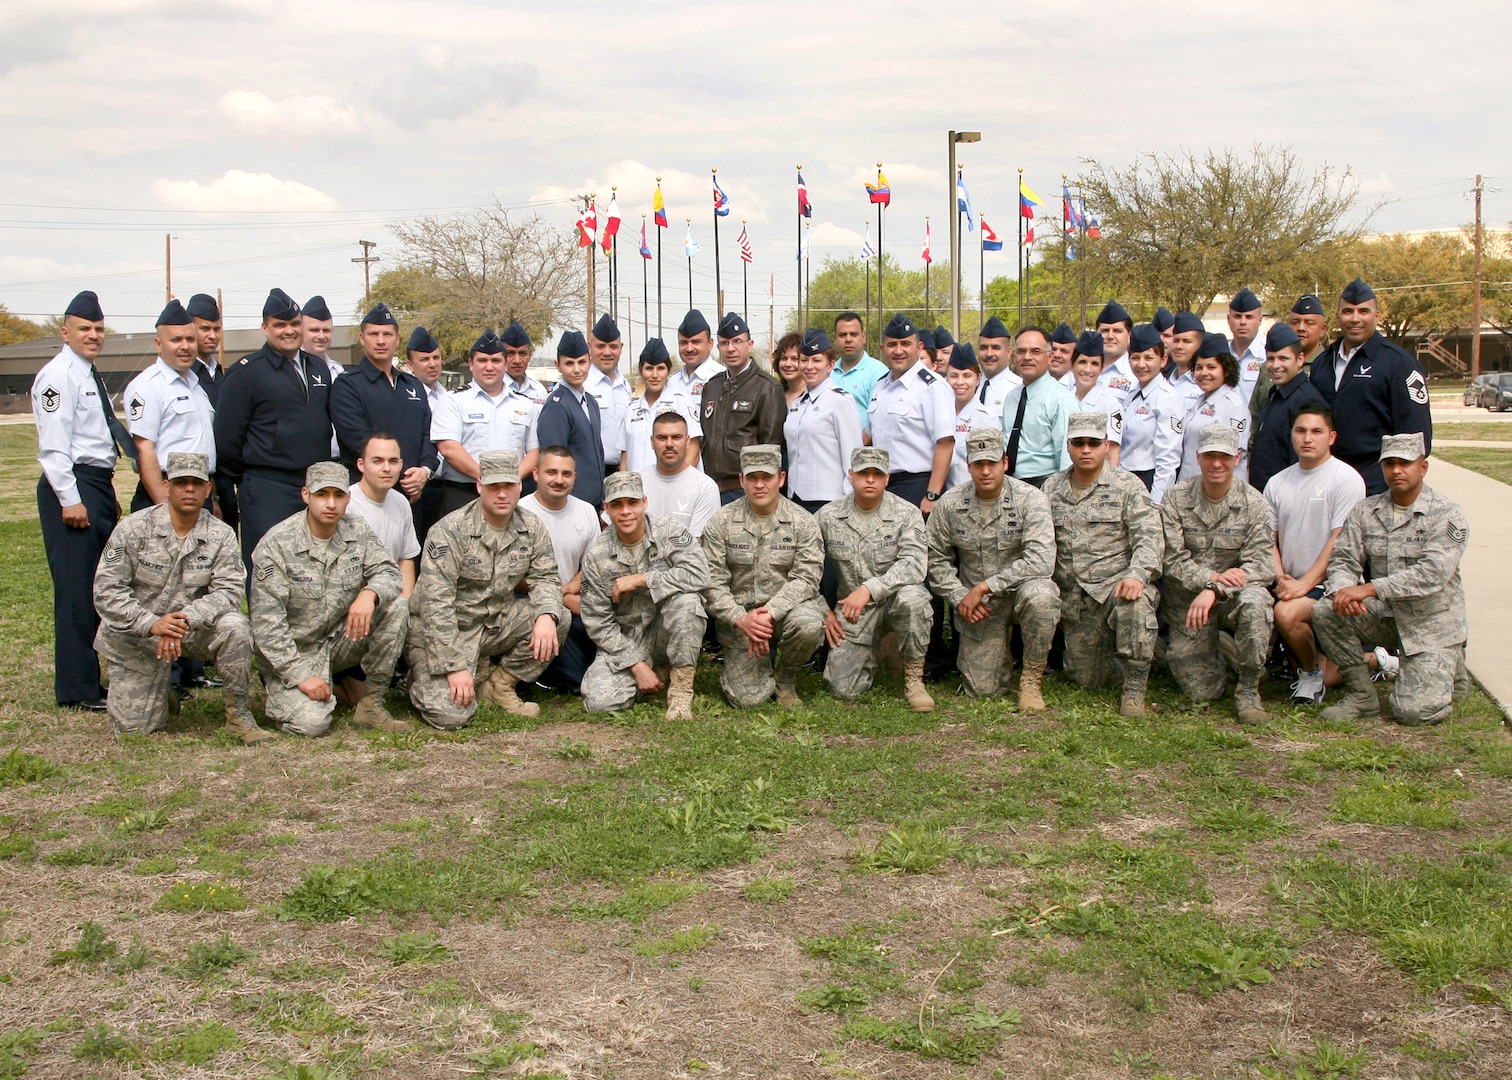 The staff of the Inter-American Air Forces Academy gathers to celebrate the academy's 67th Anniversary March 15. As the Air Force's gateway to the Americas, IAAFA has been training students from Central and South America countries since March 15, 1943. (U.S. Air Force photo/Robbin Cresswell)